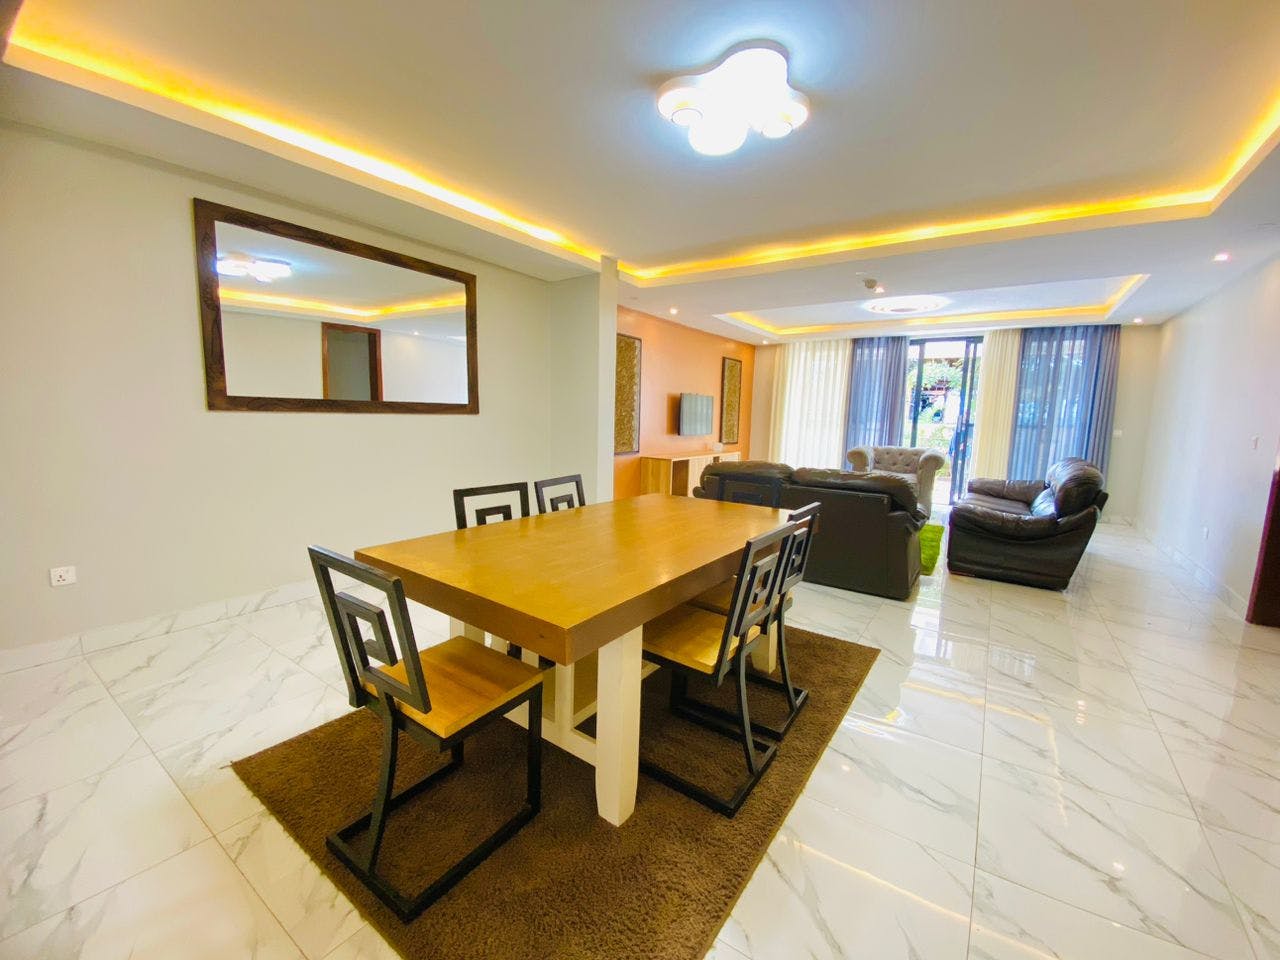 Fully furnished apartment for rent in Kigali| Kimironko Zindiro beautiful apartment for rent